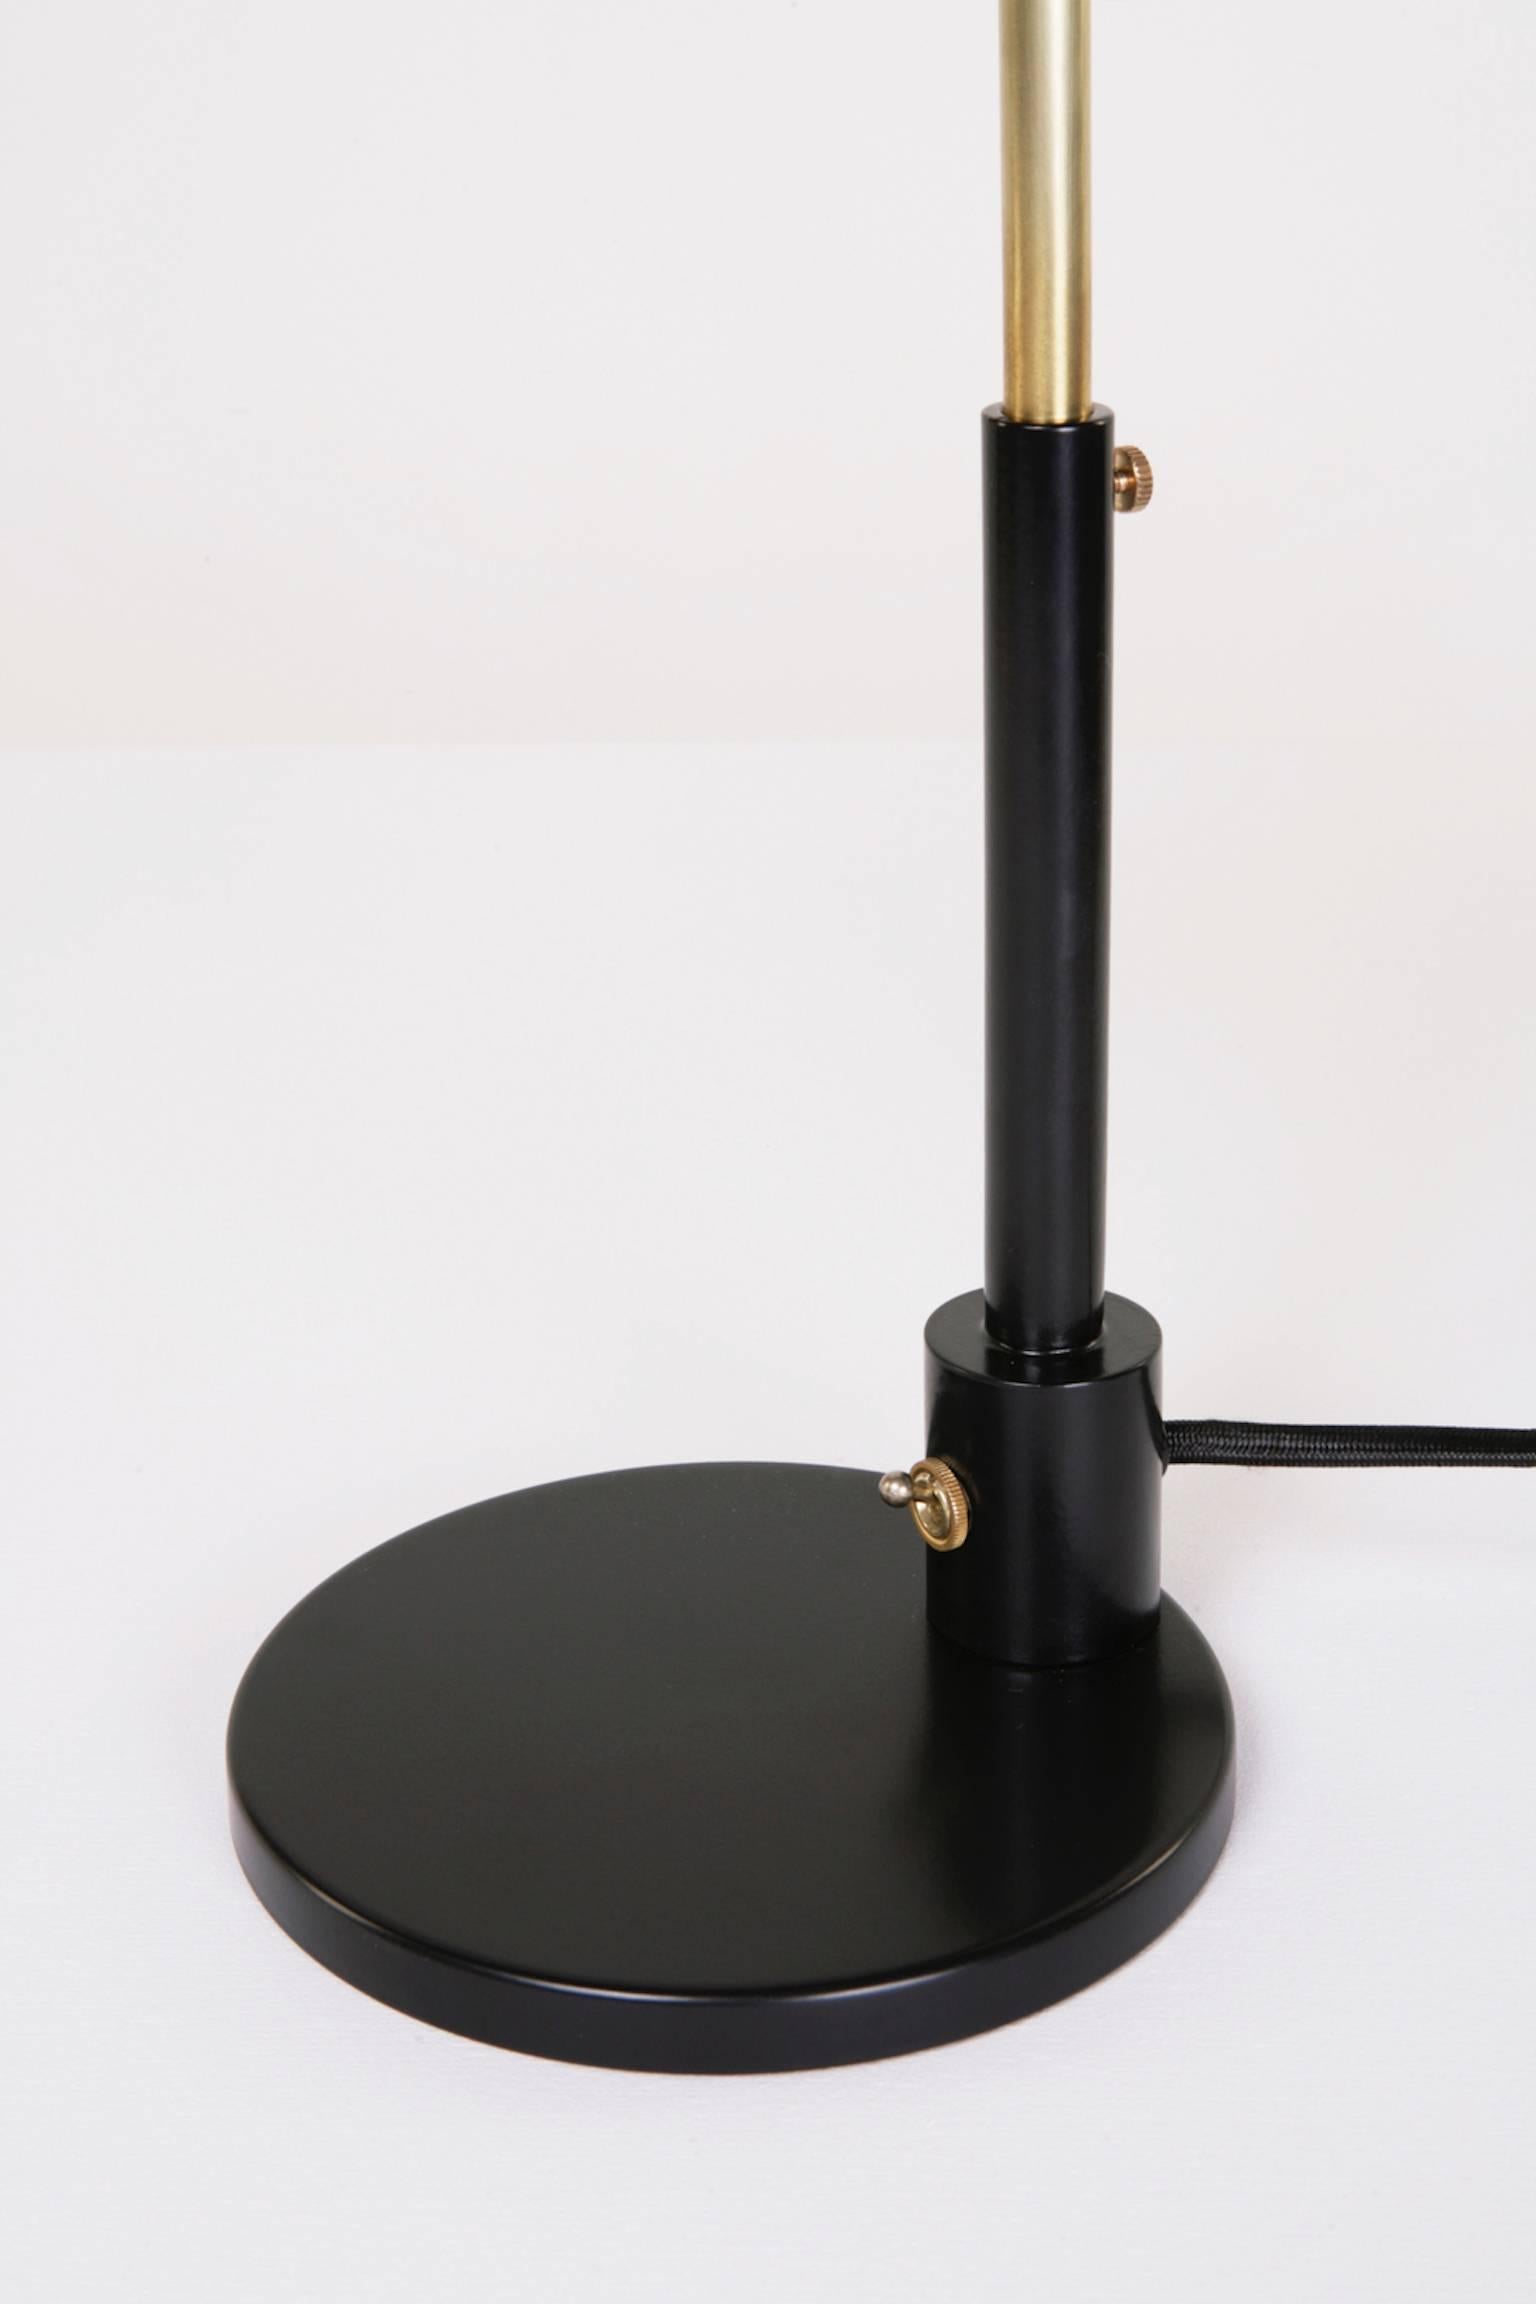 American Navire Table Lamp solid brass arm and tilting brass shade black powder coat